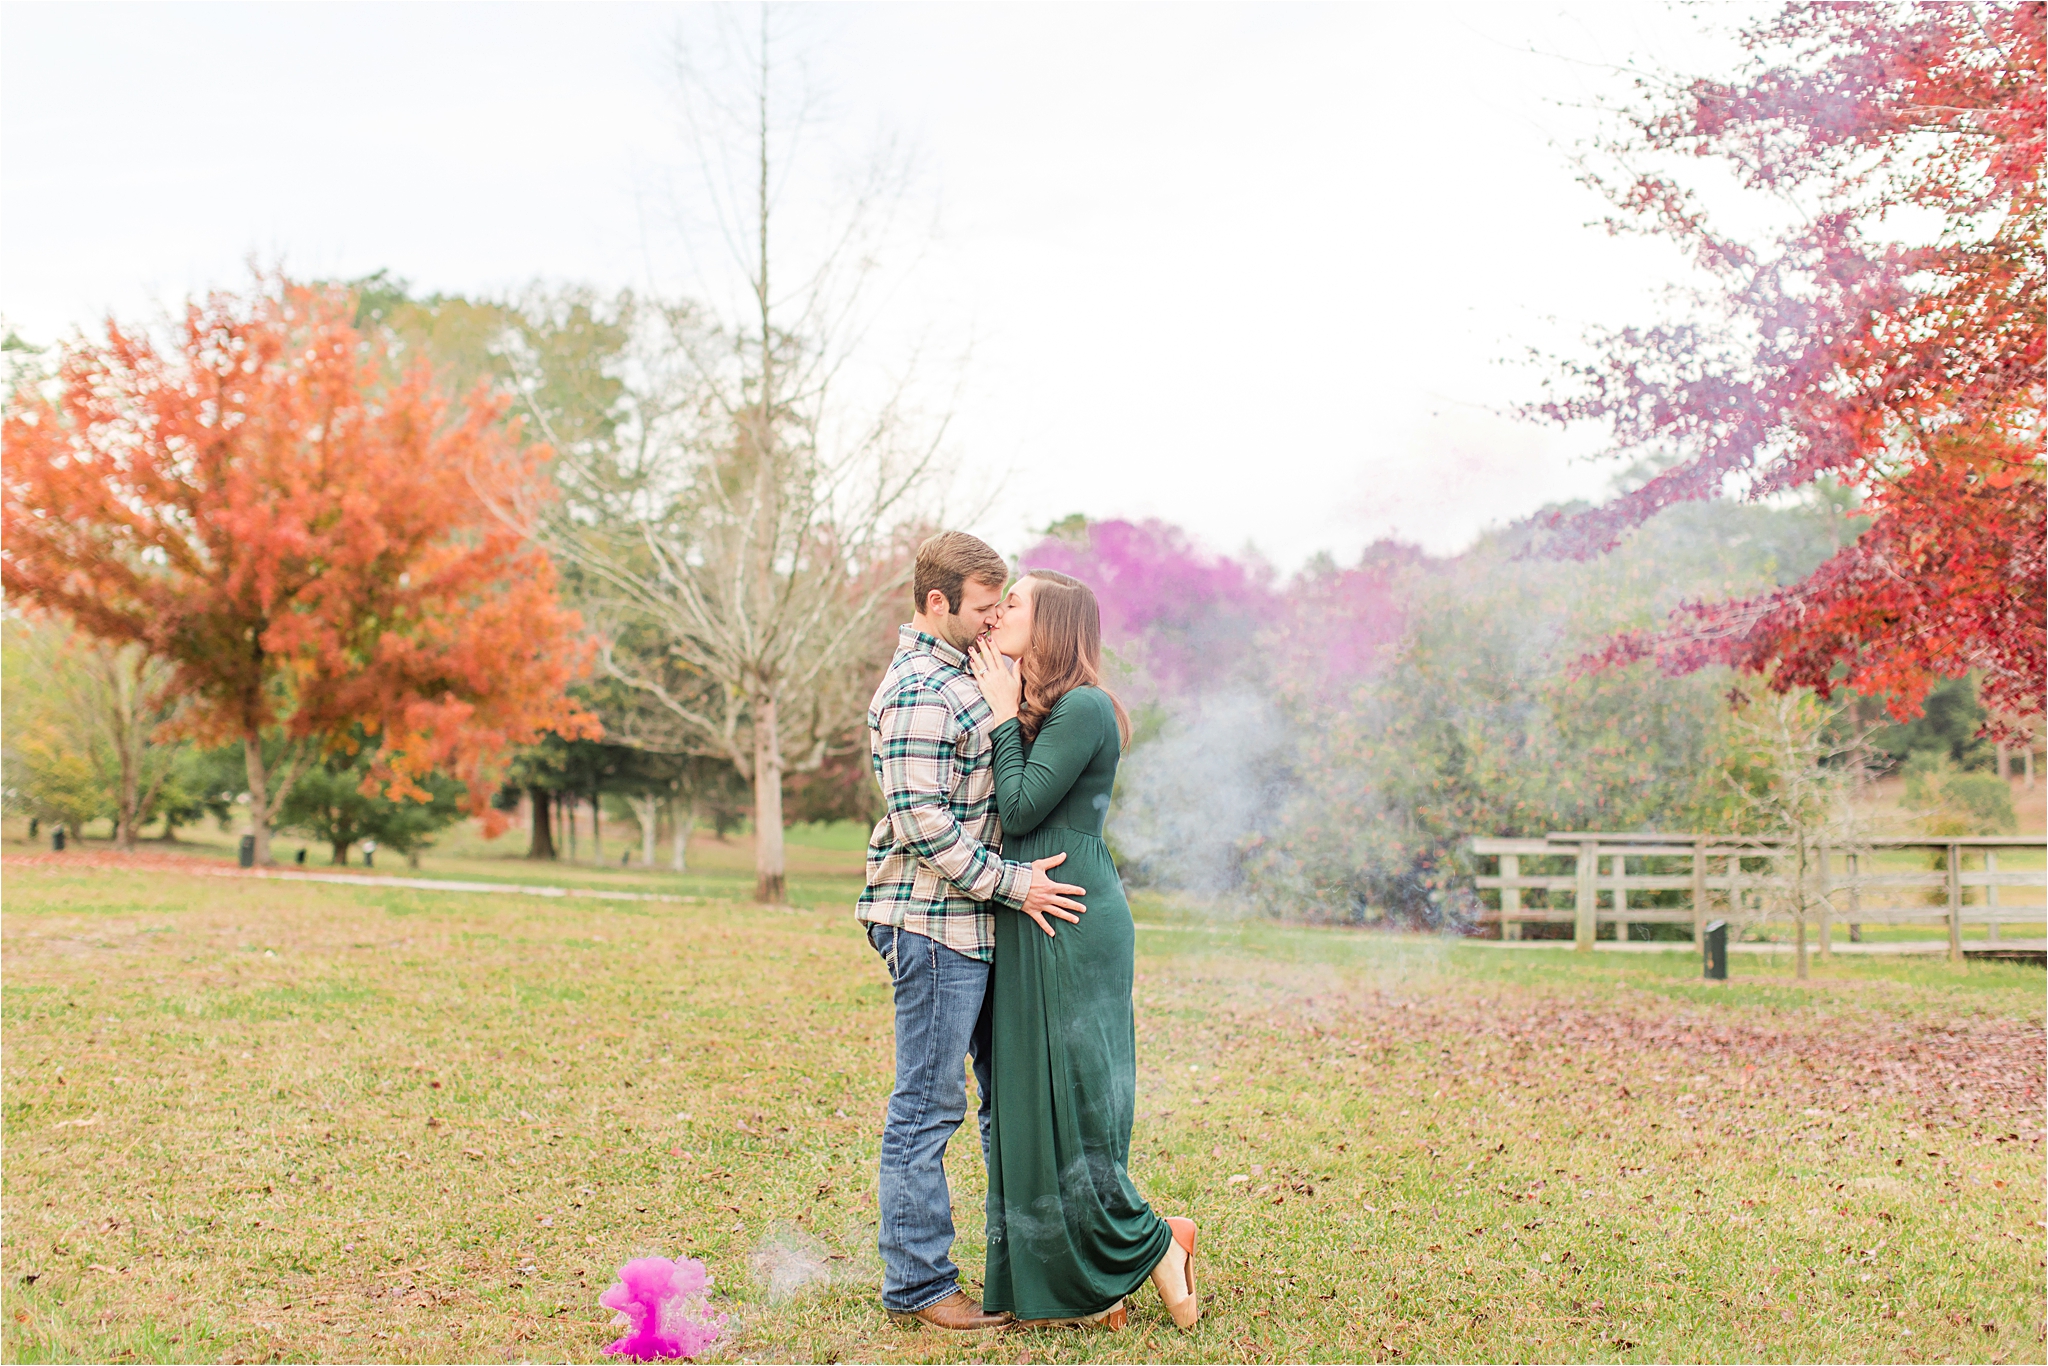 autumn-maternity-session-baby-announcement-alabama-photographer-family-smoke bombs